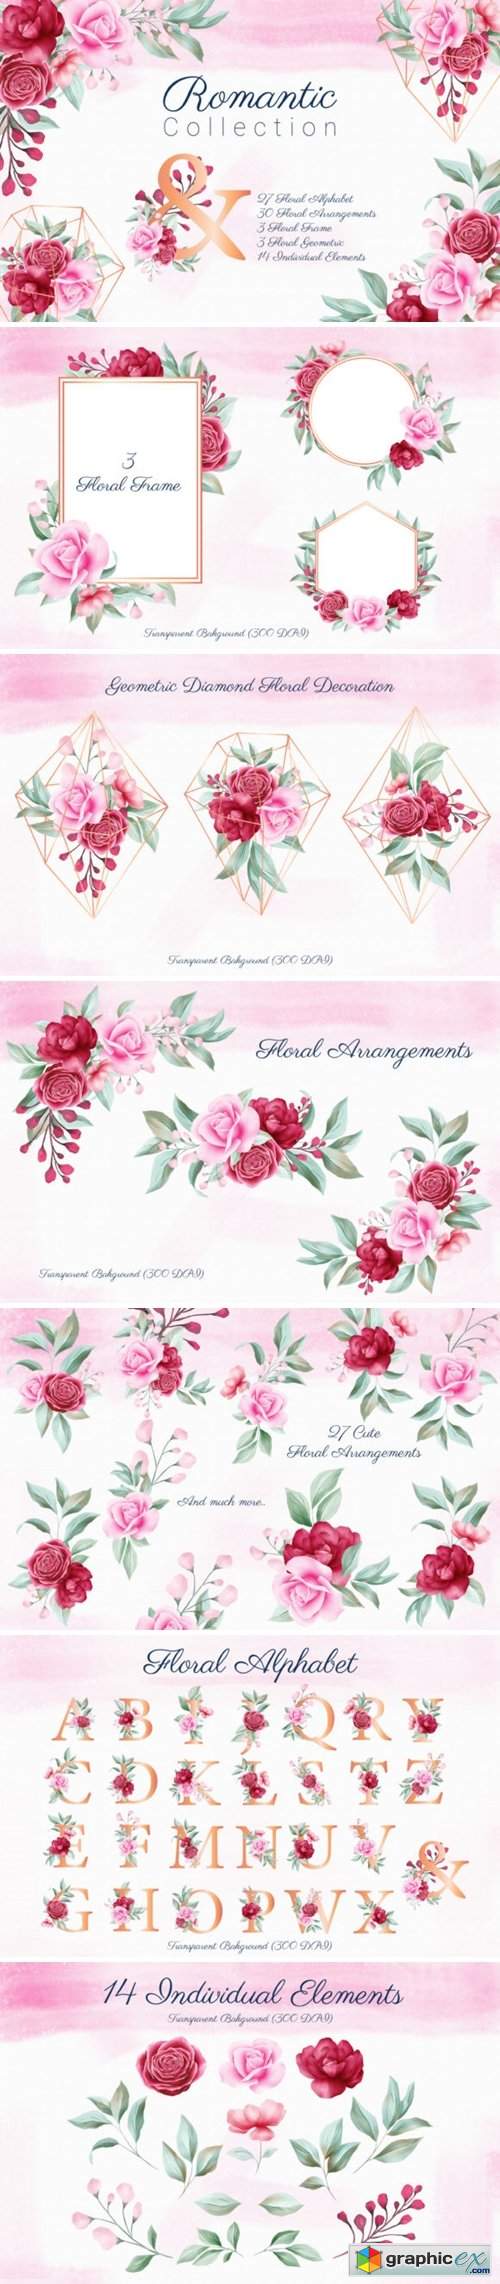 Romantic Watercolor Flowers Collection